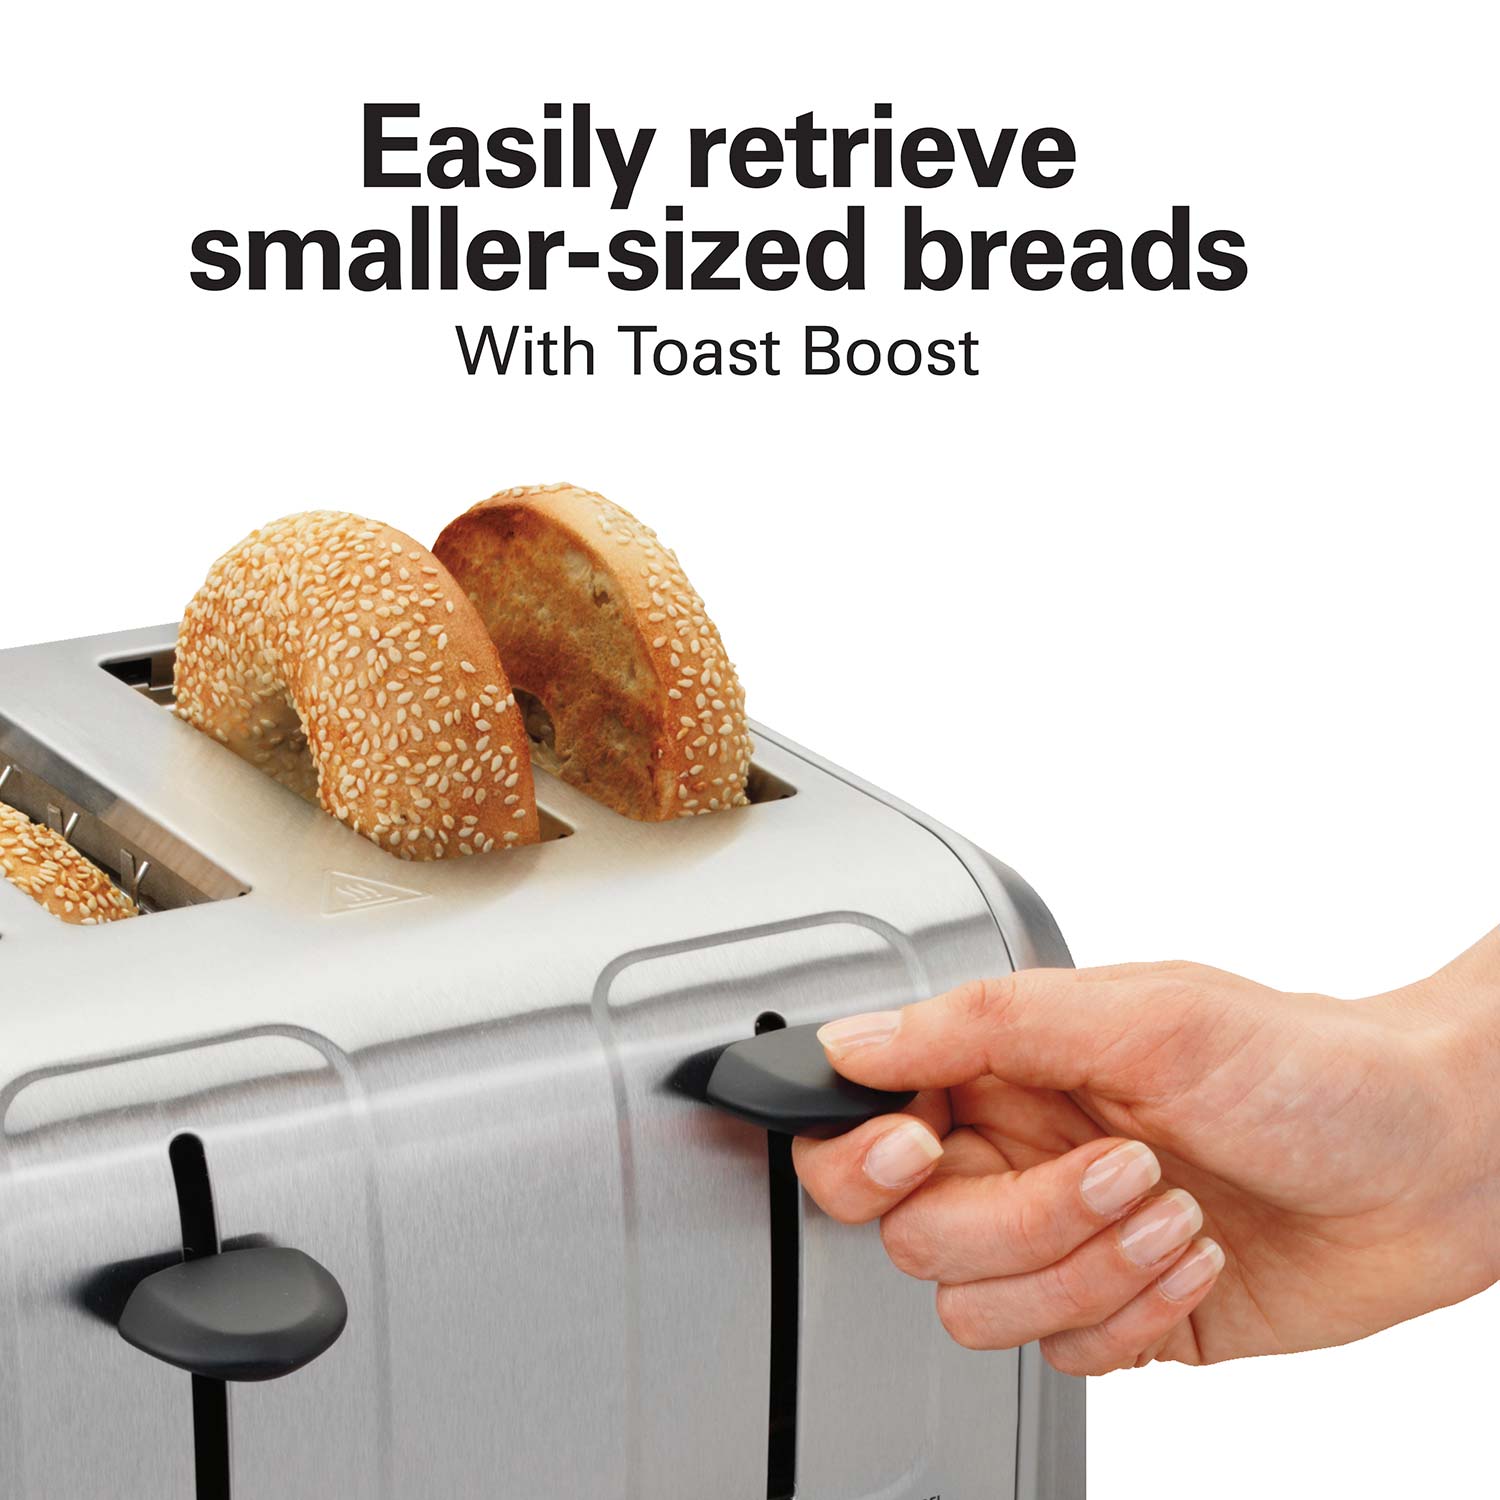 Hamilton Beach 4 Slice Toaster with Extra-Wide Slots, Bagel Setting, Toast  Boost, Slide-Out Crumb Tray, Auto-Shutoff & Cancel Button, Digital with